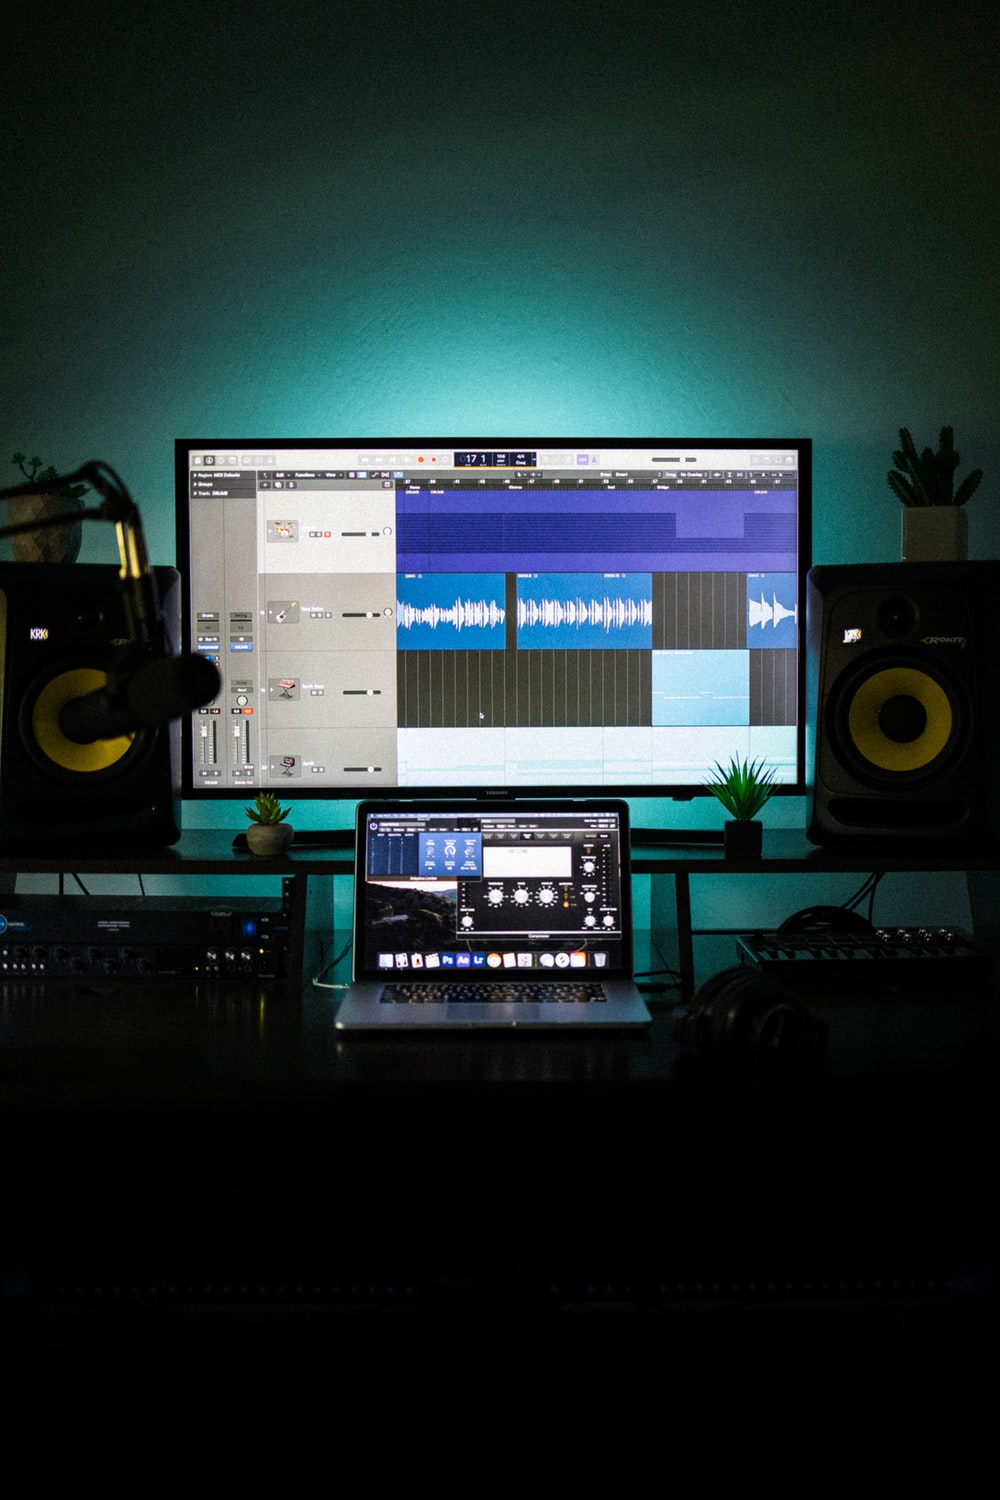 Logic Pro X Picture. Download Free Image